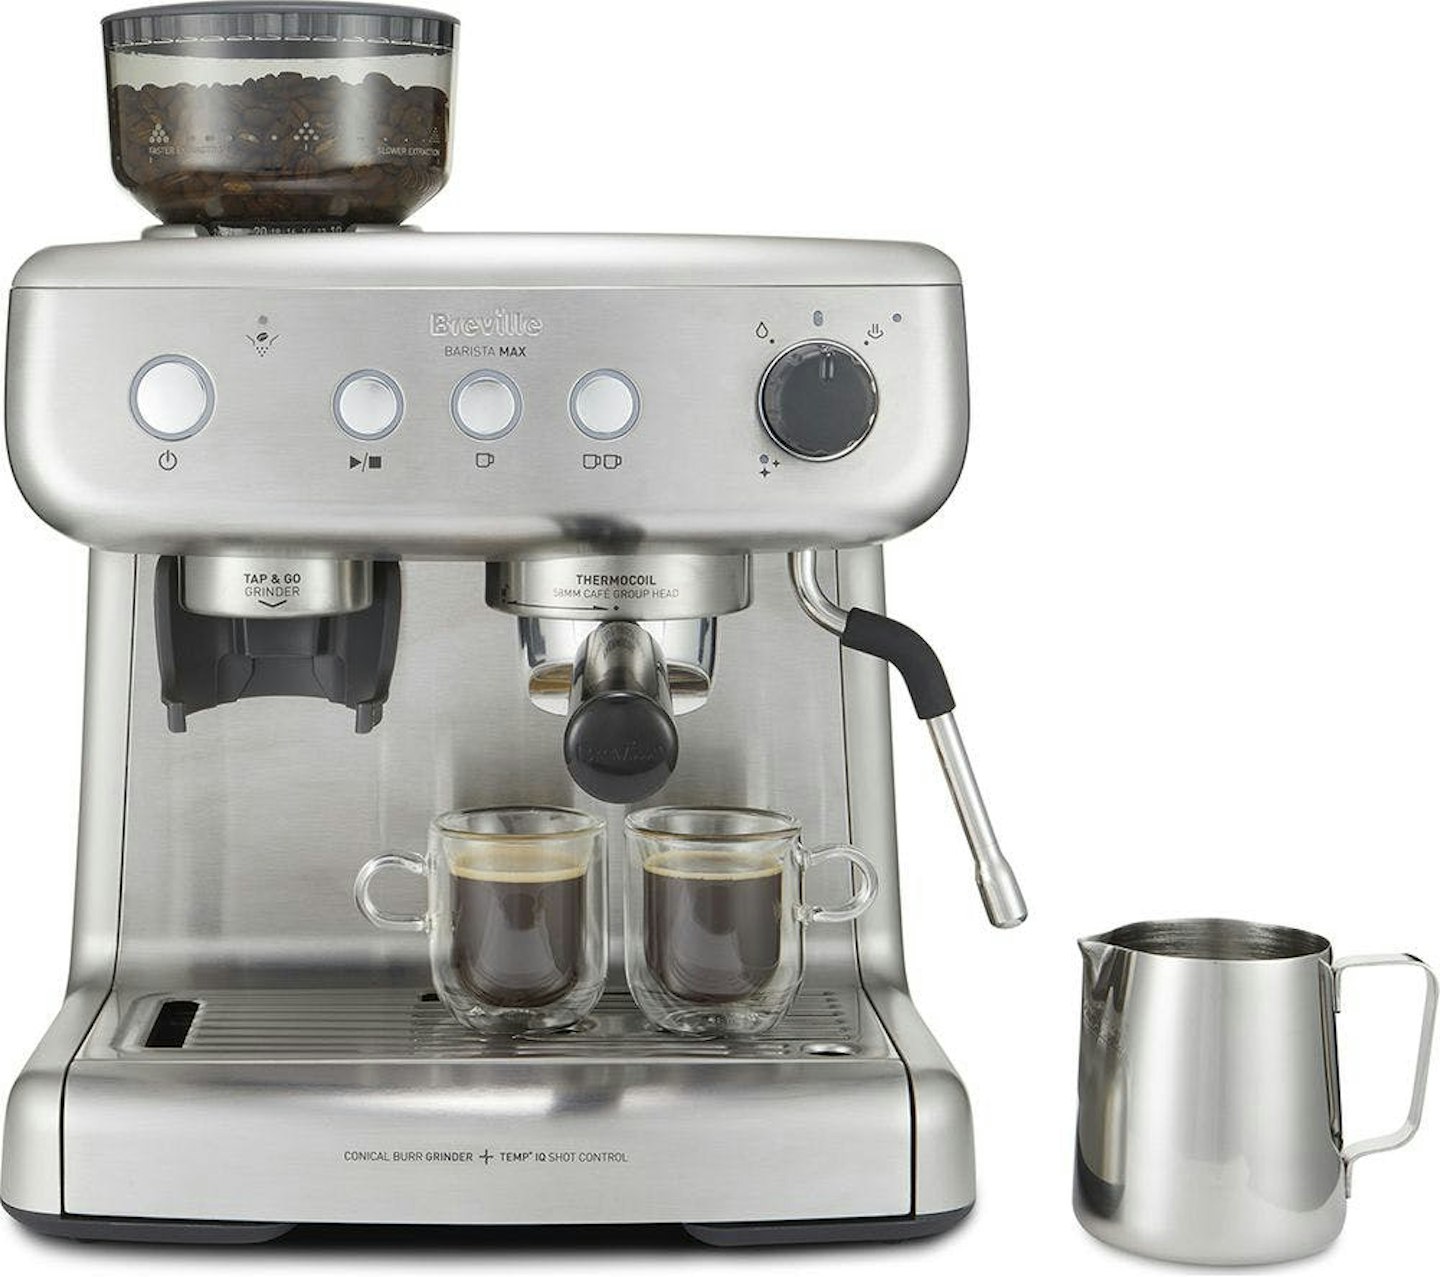 The best bean-to-cup coffee machines: BREVILLE VCF126 Barista Max Coffee Machine - Stainless Steel